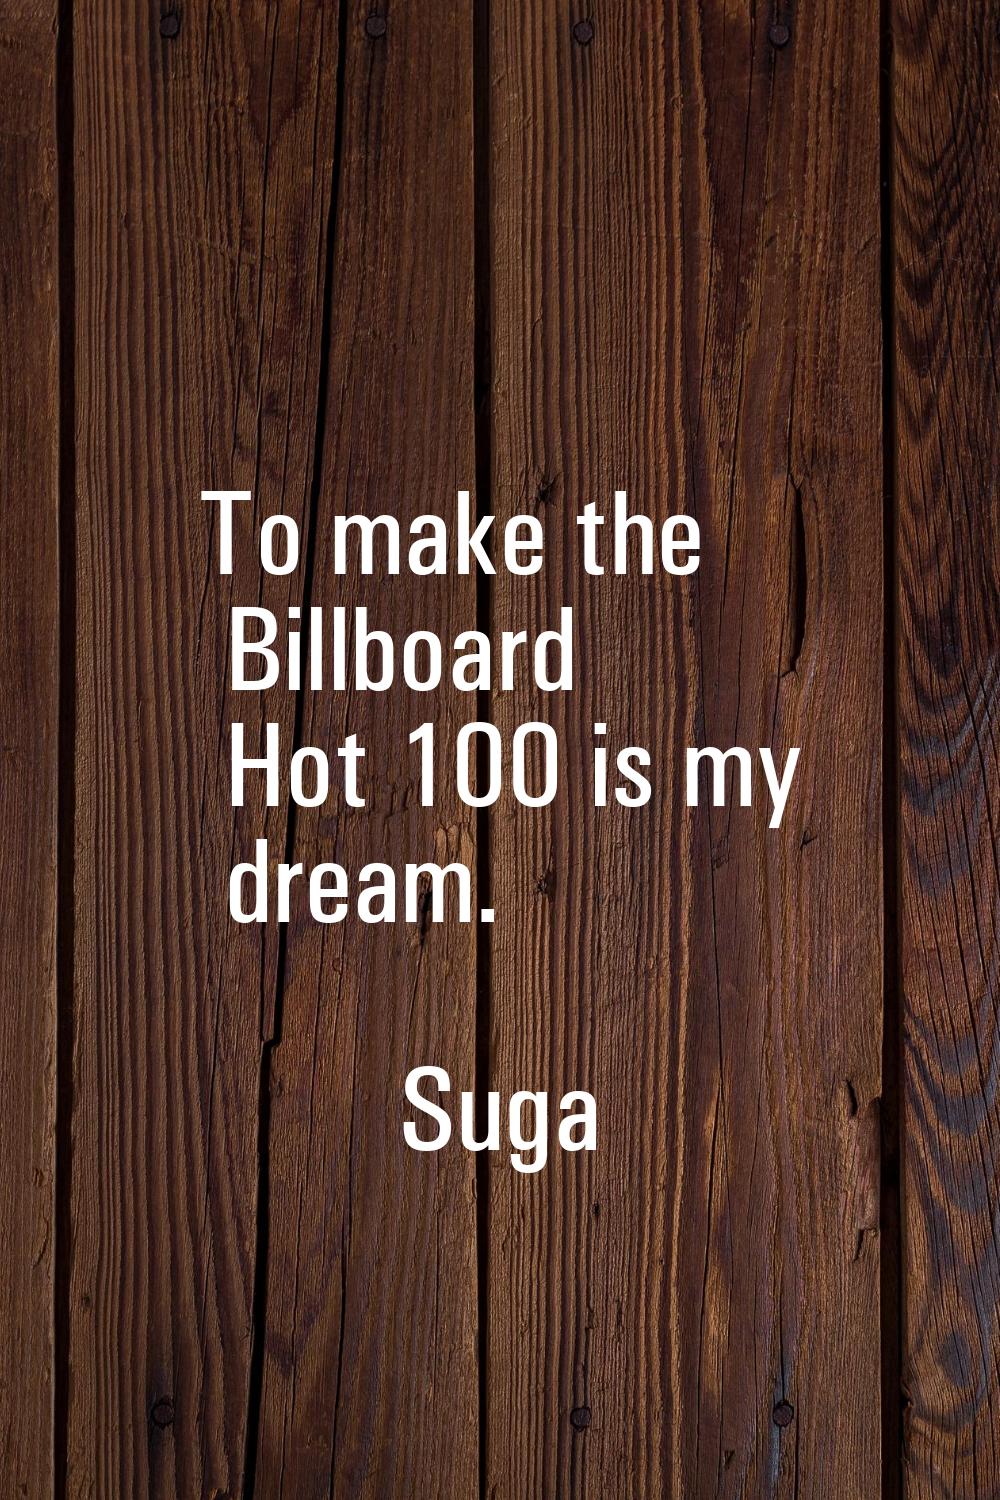 To make the Billboard Hot 100 is my dream.